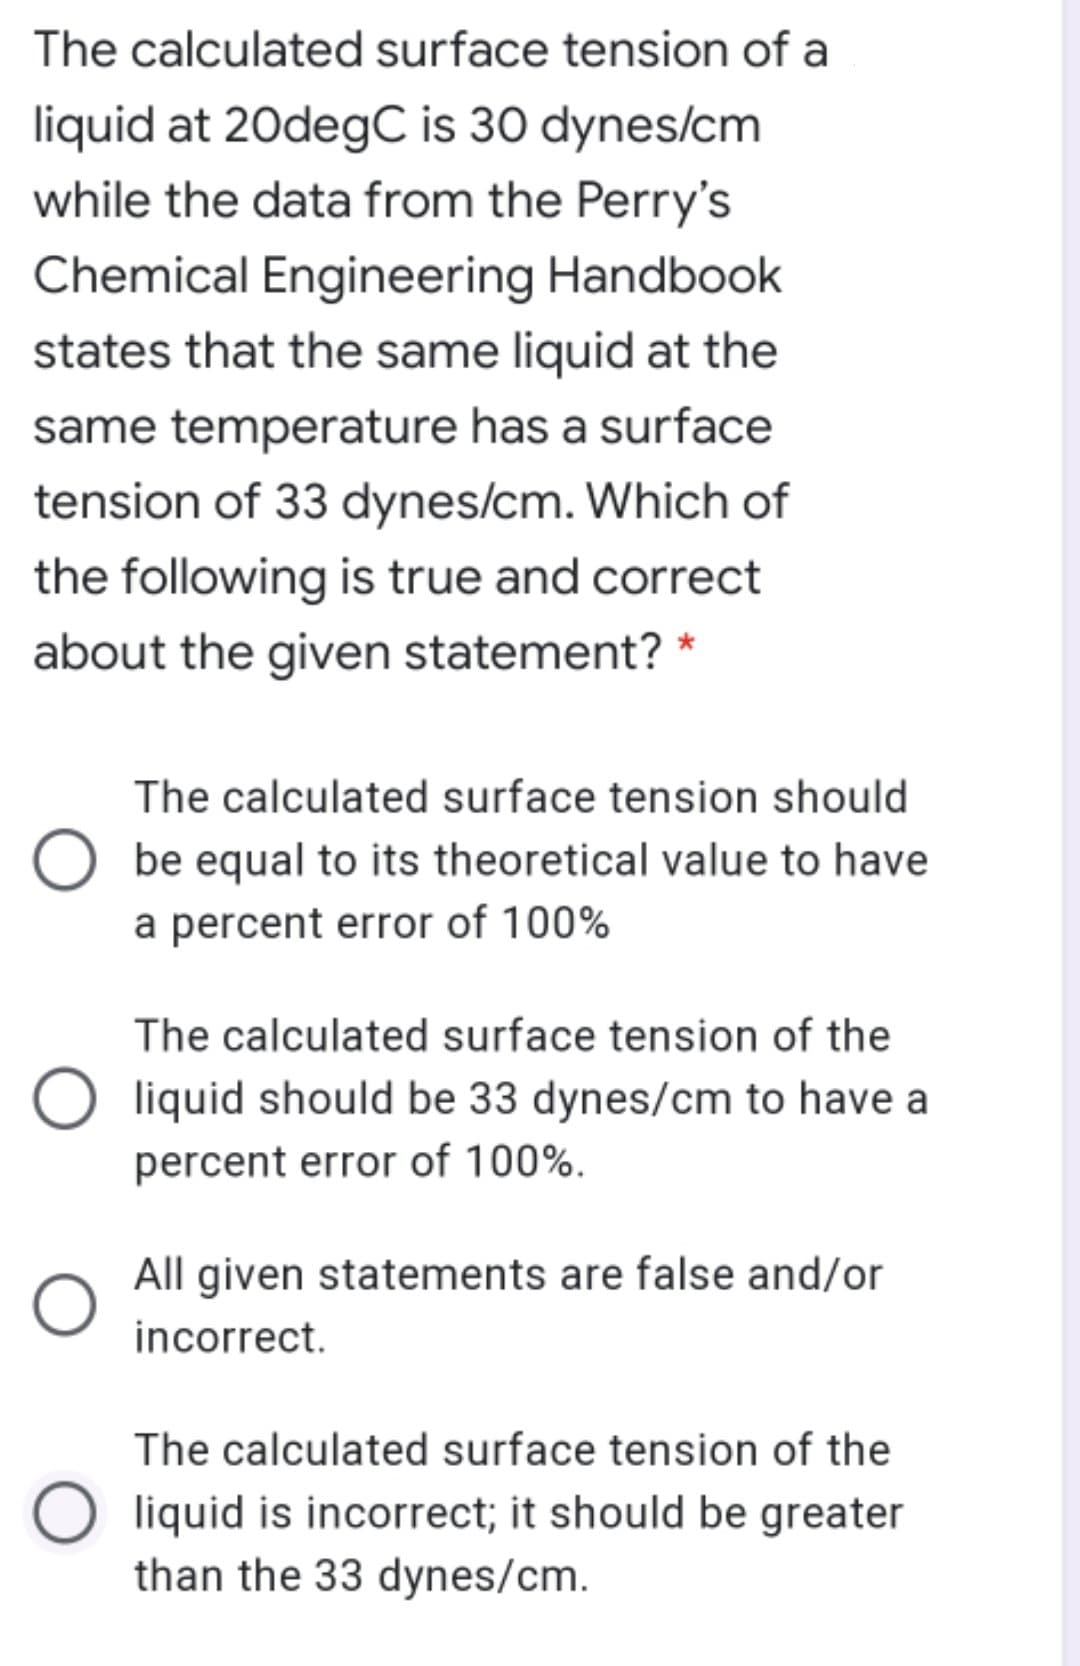 The calculated surface tension of a
liquid at 20degC is 30 dynes/cm
while the data from the Perry's
Chemical Engineering Handbook
states that the same liquid at the
same temperature has a surface
tension of 33 dynes/cm. Which of
the following is true and correct
about the given statement? *
The calculated surface tension should
be equal to its theoretical value to have
a percent error of 100%
The calculated surface tension of the
liquid should be 33 dynes/cm to have a
percent error of 100%.
All given statements are false and/or
incorrect.
The calculated surface tension of the
liquid is incorrect; it should be greater
than the 33 dynes/cm.
